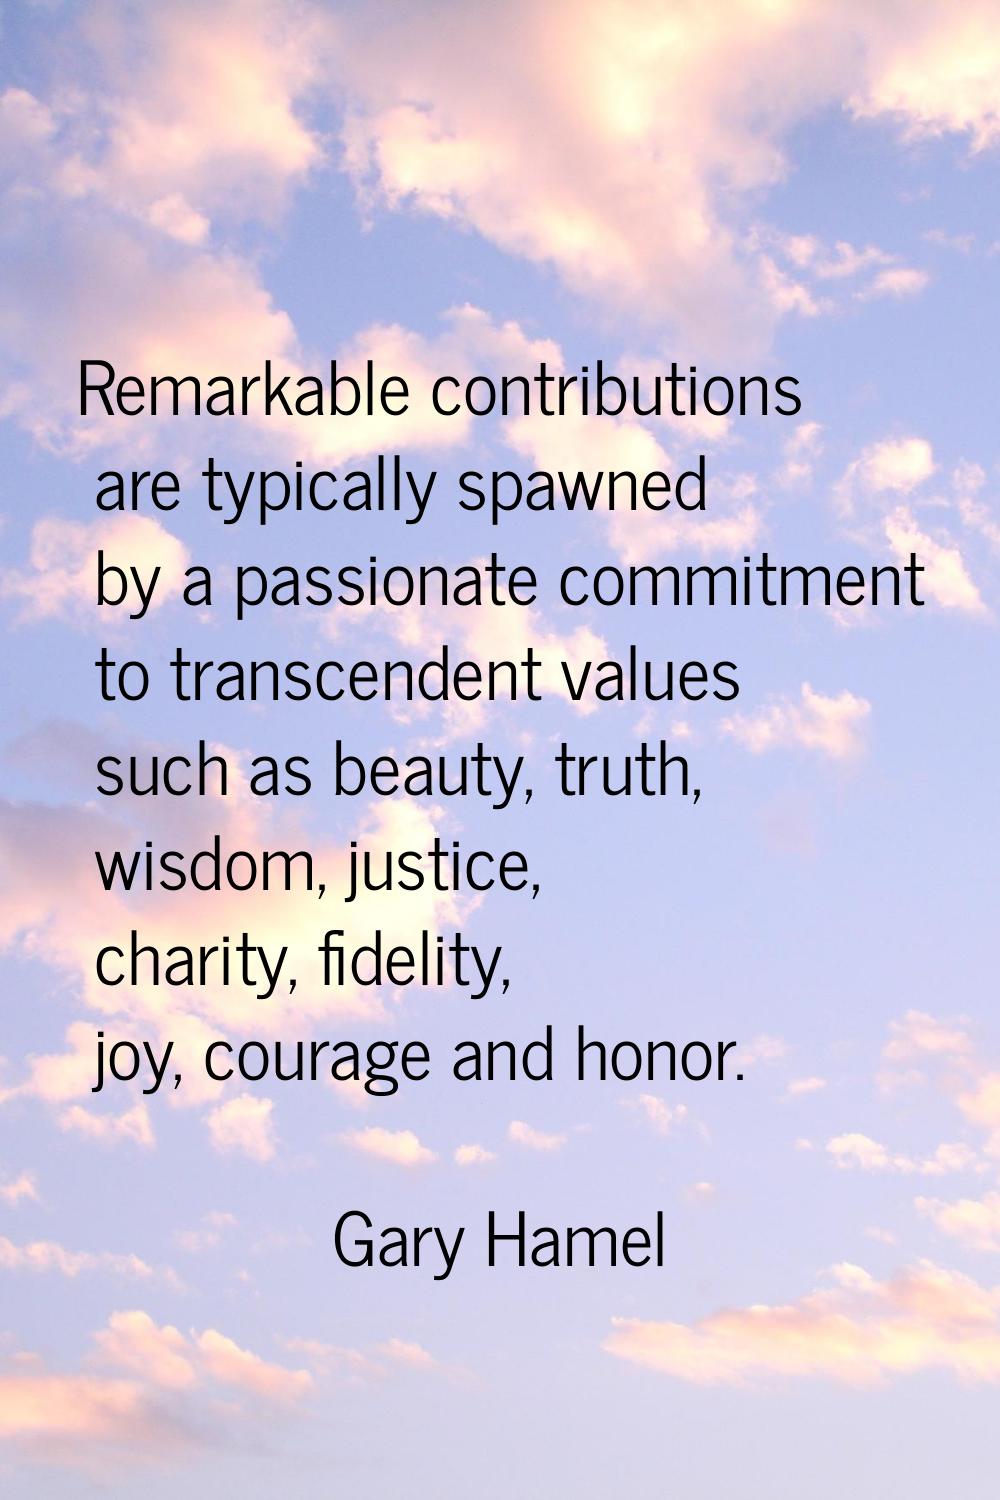 Remarkable contributions are typically spawned by a passionate commitment to transcendent values su